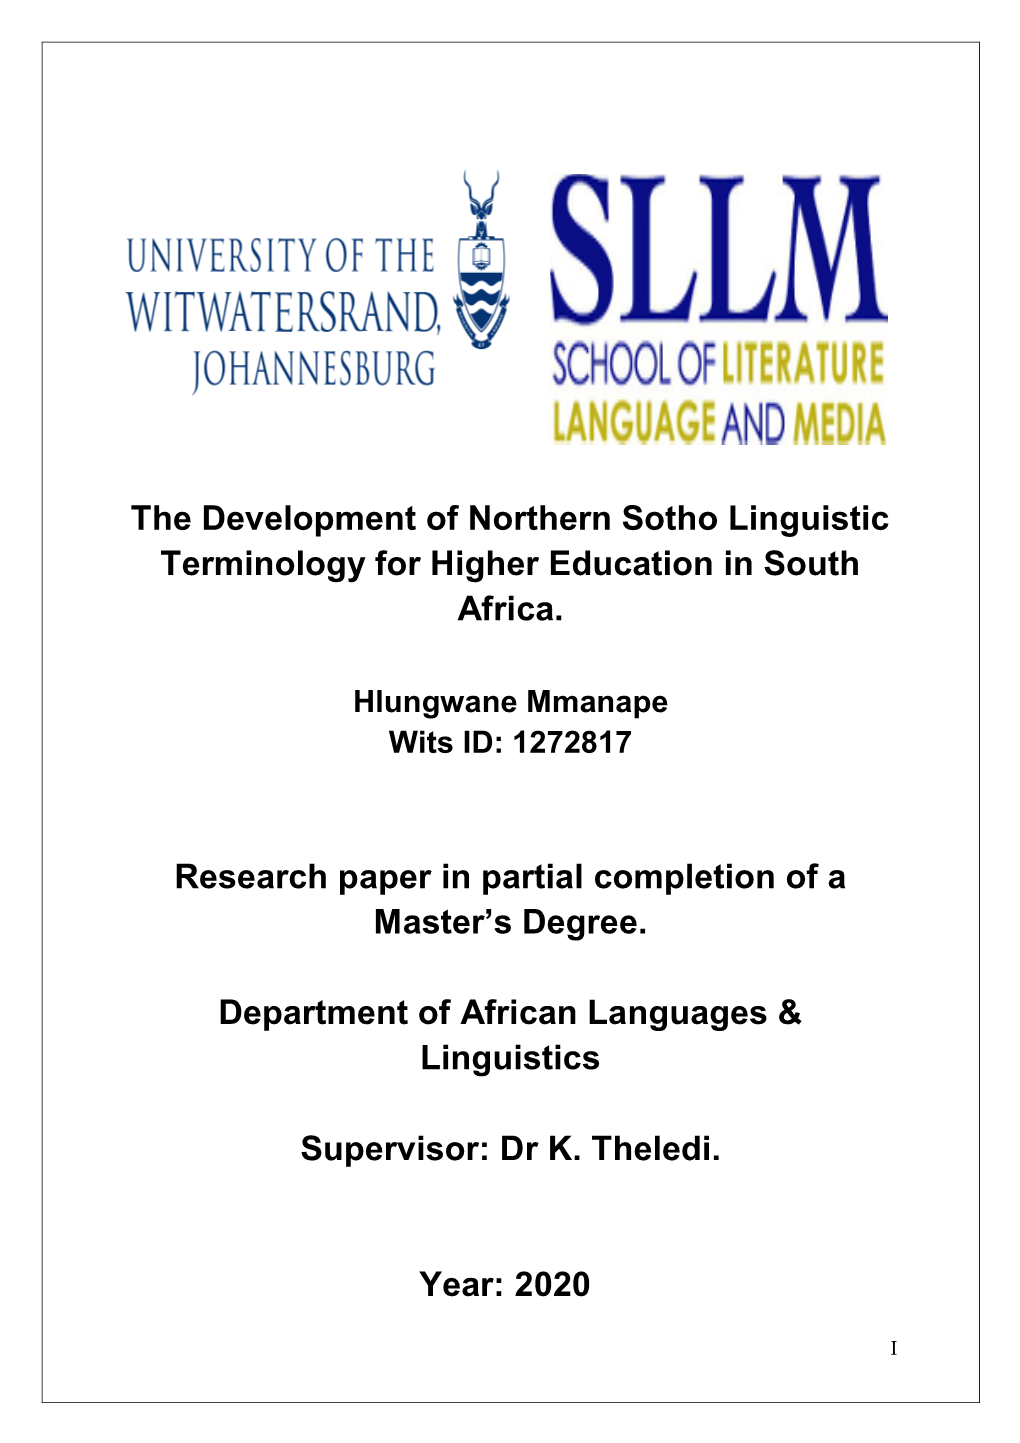 The Development of Northern Sotho Linguistic Terminology for Higher Education in South Africa